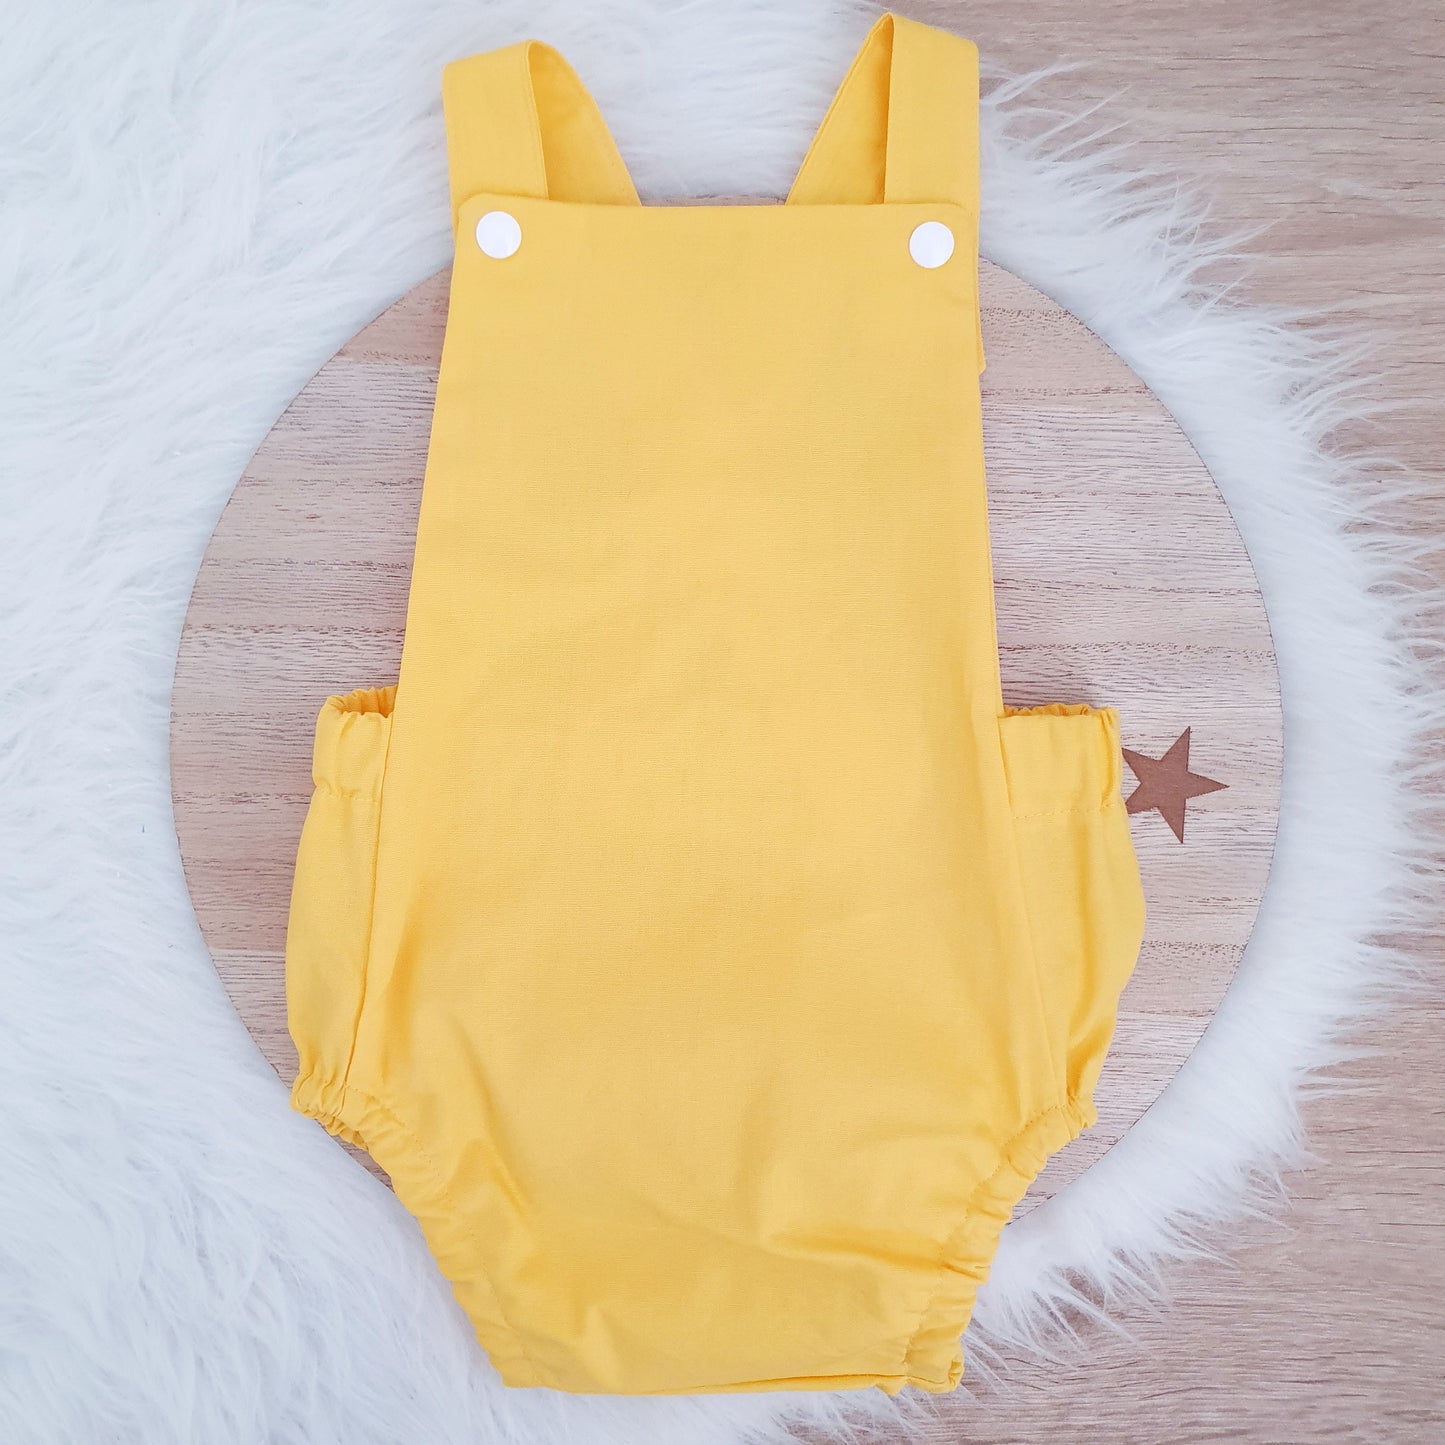 YELLOW Baby Romper, Handmade Baby Clothing, Size 0 - 1st Birthday Clothing / Cake Smash Outfit - YELLOW, 9 - 12 months